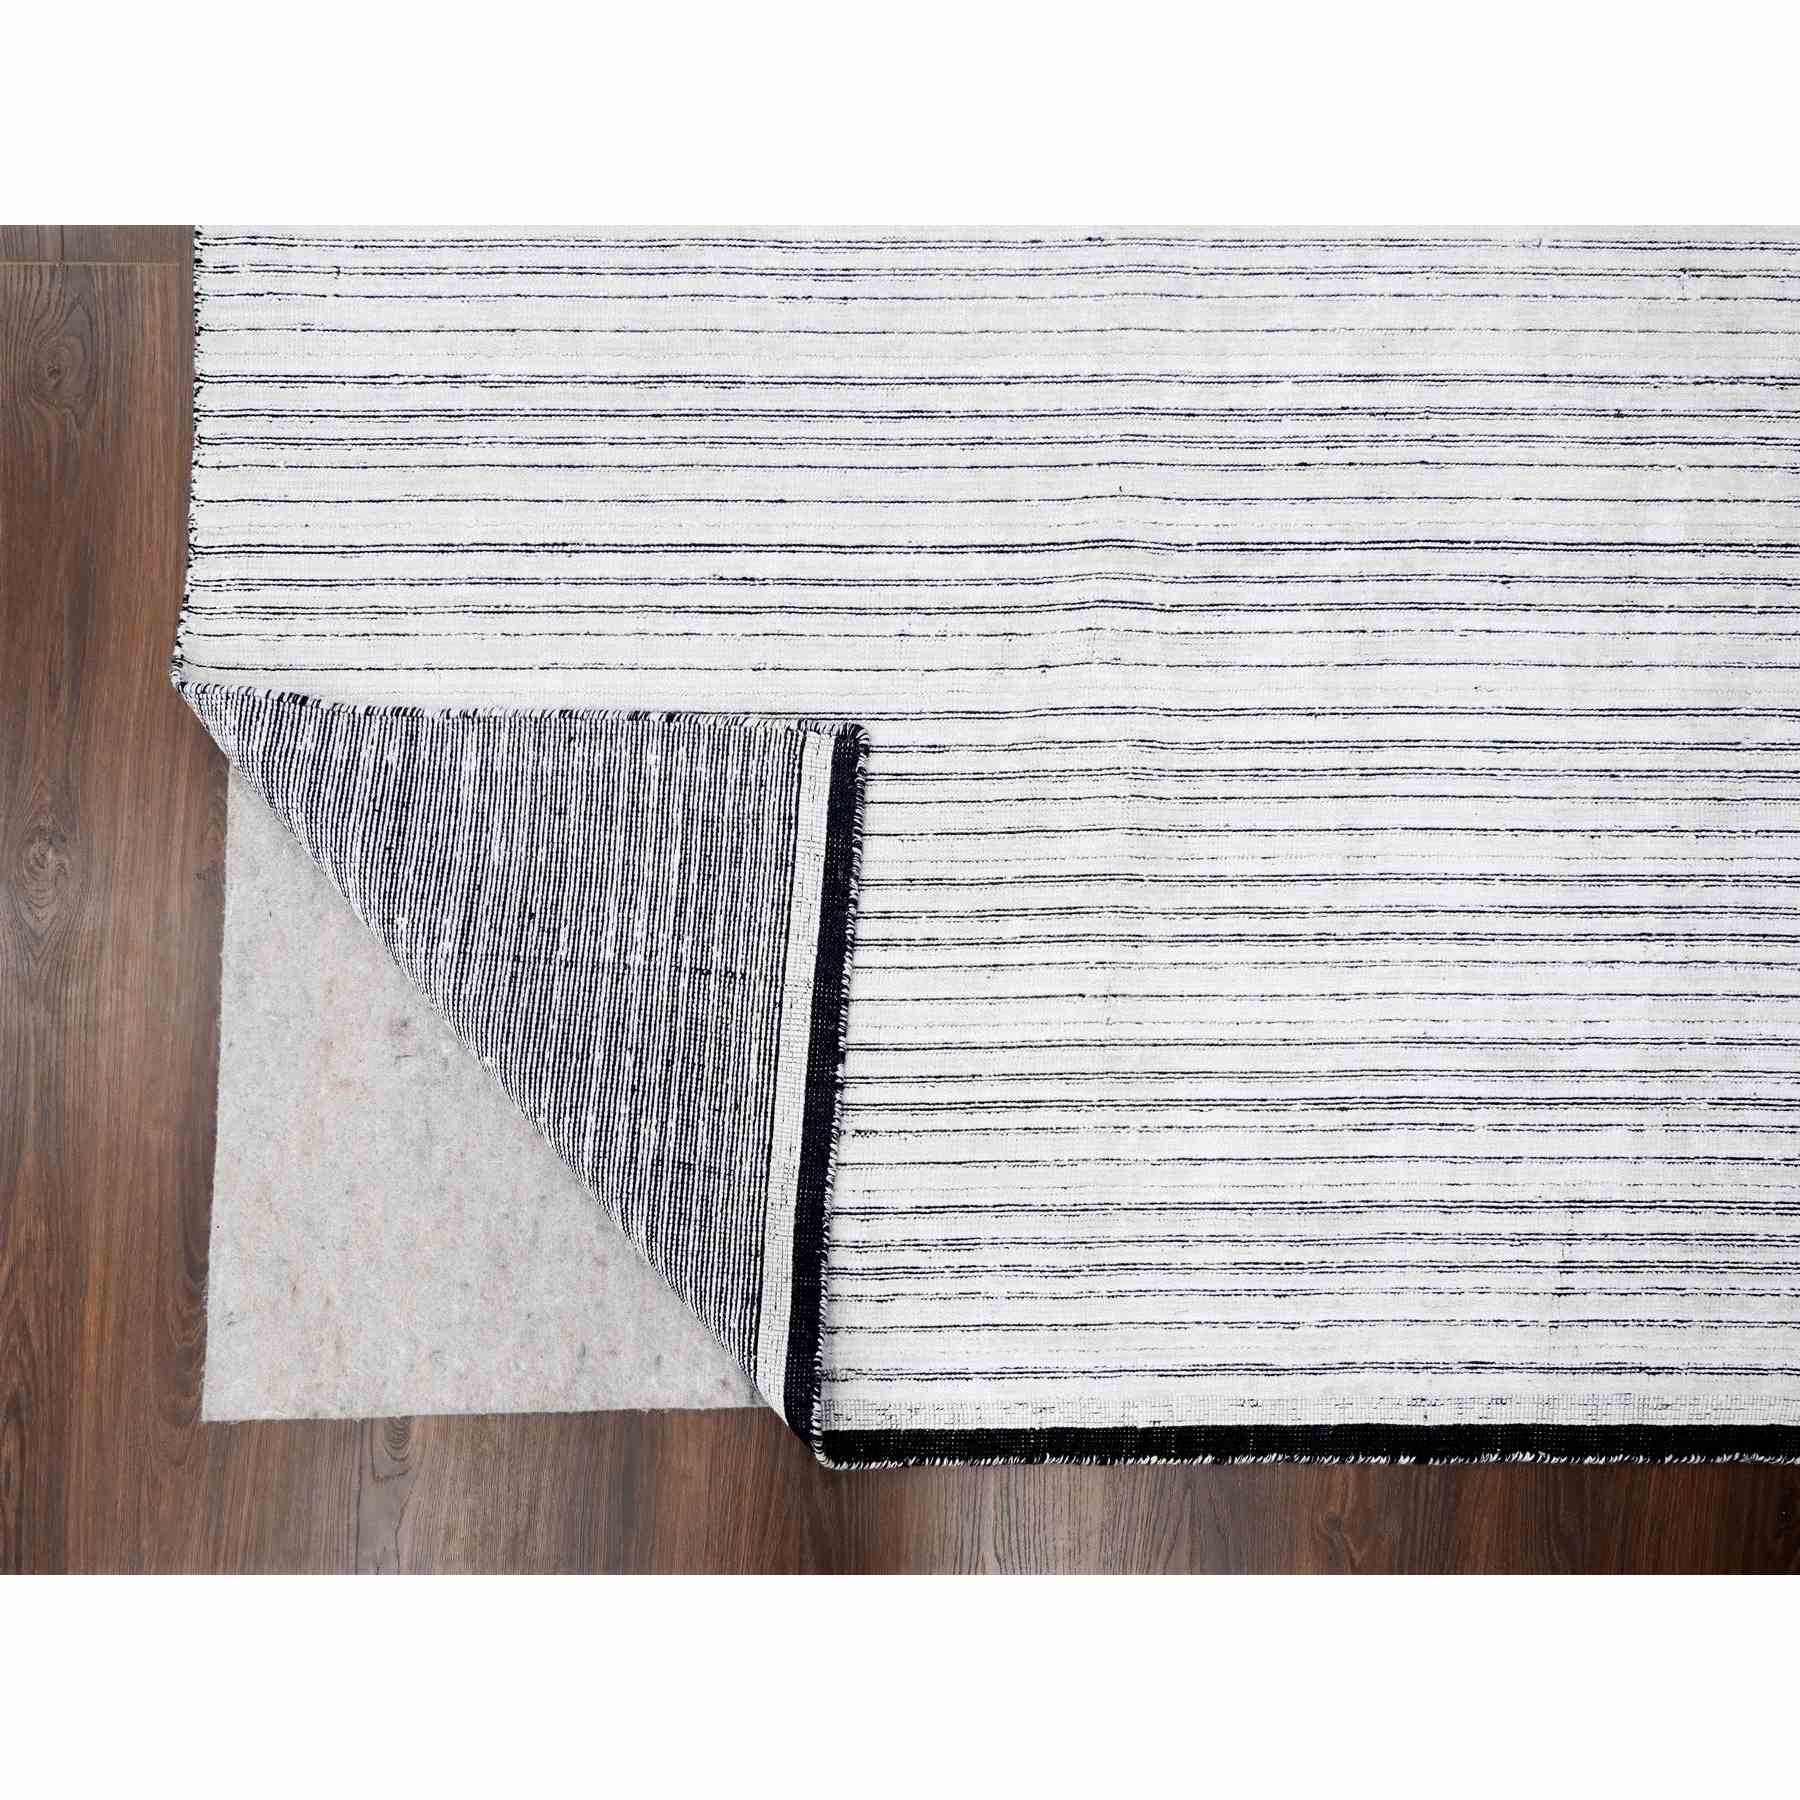 Modern-and-Contemporary-Hand-Loomed-Rug-421670